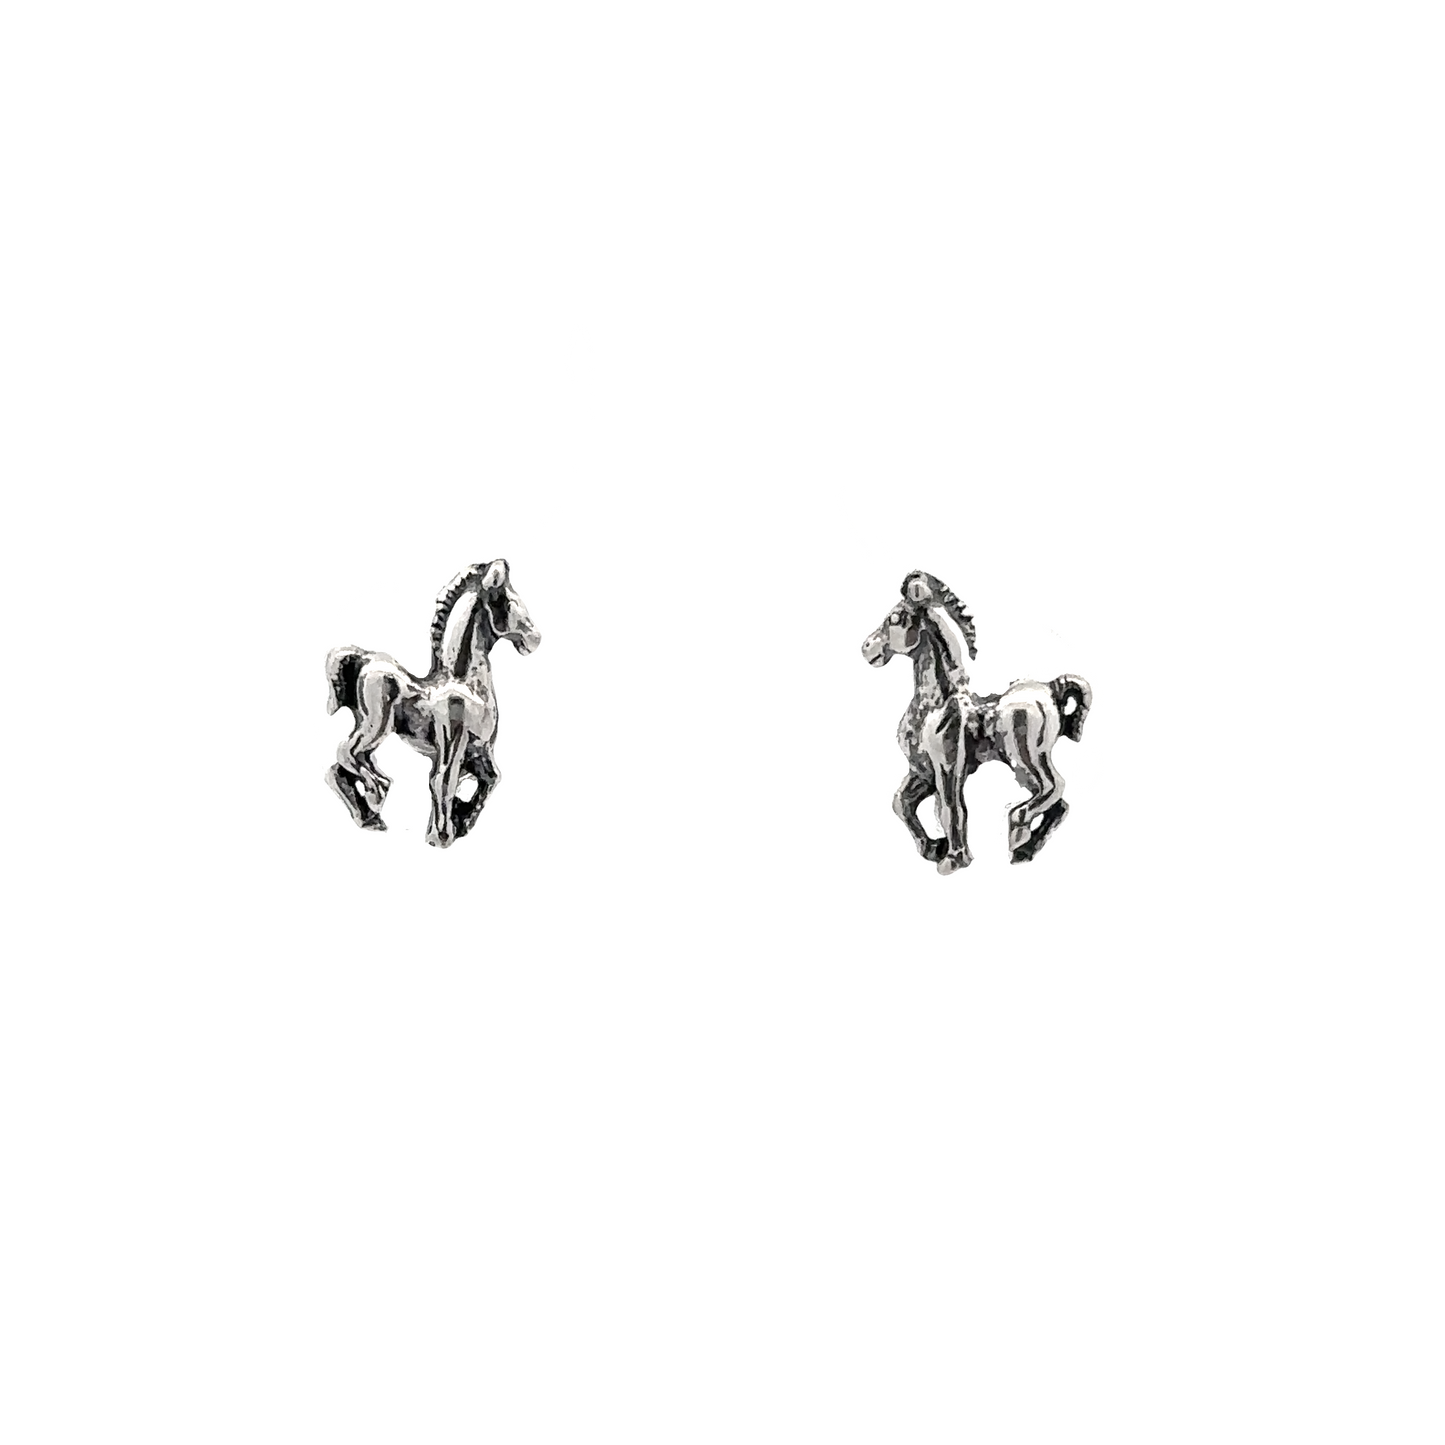 A pair of Horse Studs earrings on a white background, perfect for any horse lover.